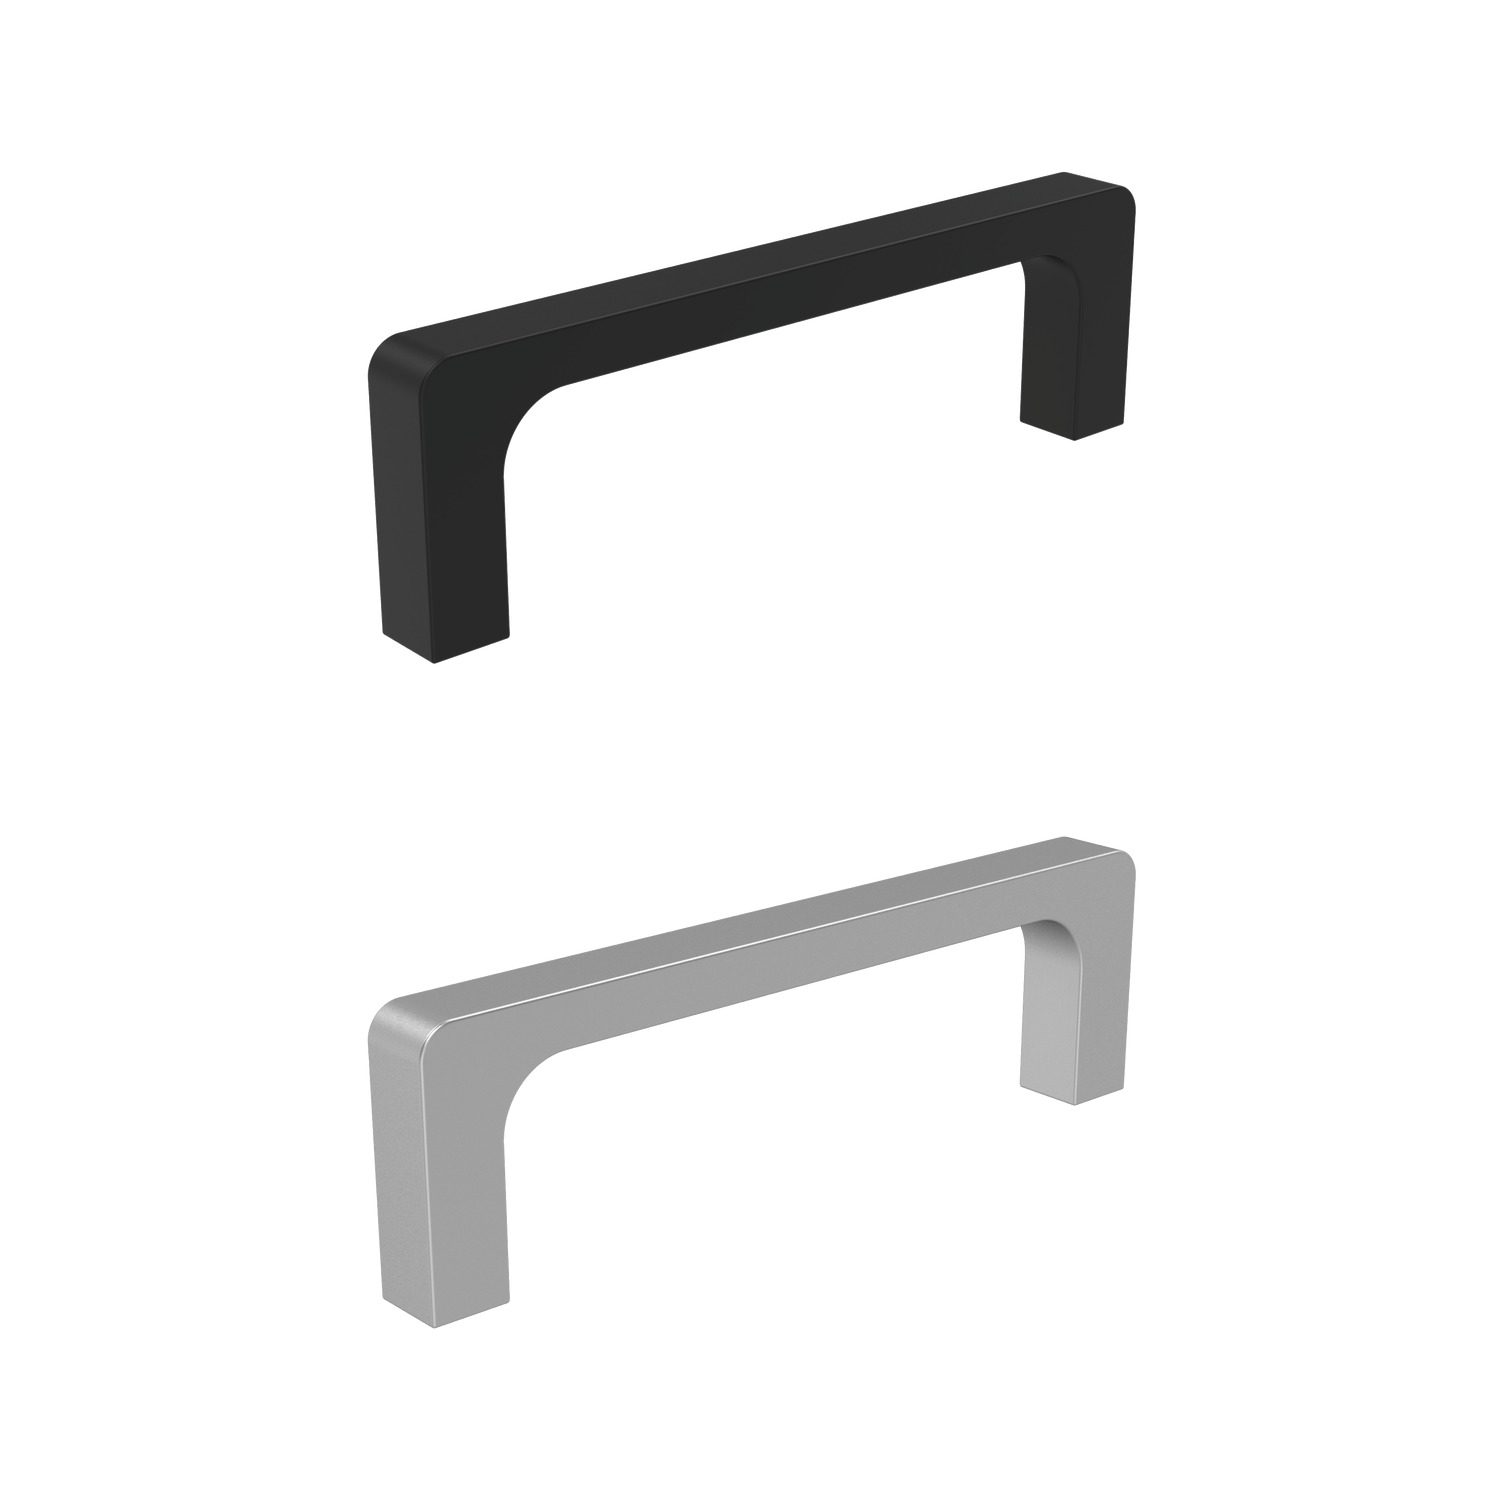 Product 78120, Pull Handles - Aluminium for 19" drawers and instrument panels / 